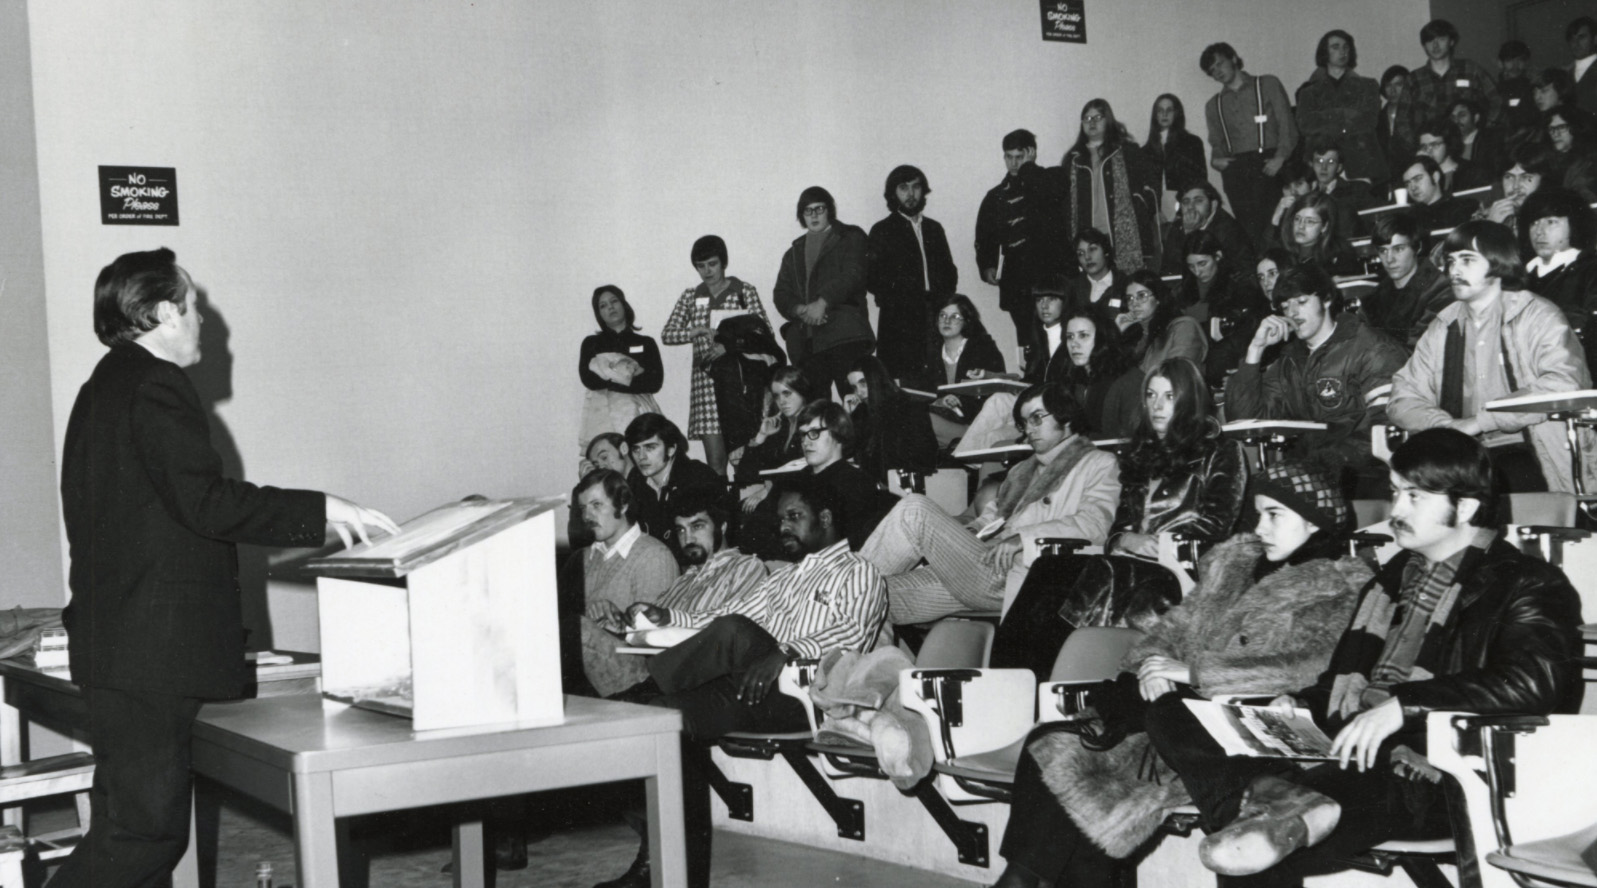 Professor lecturing to a crowded lecture hall